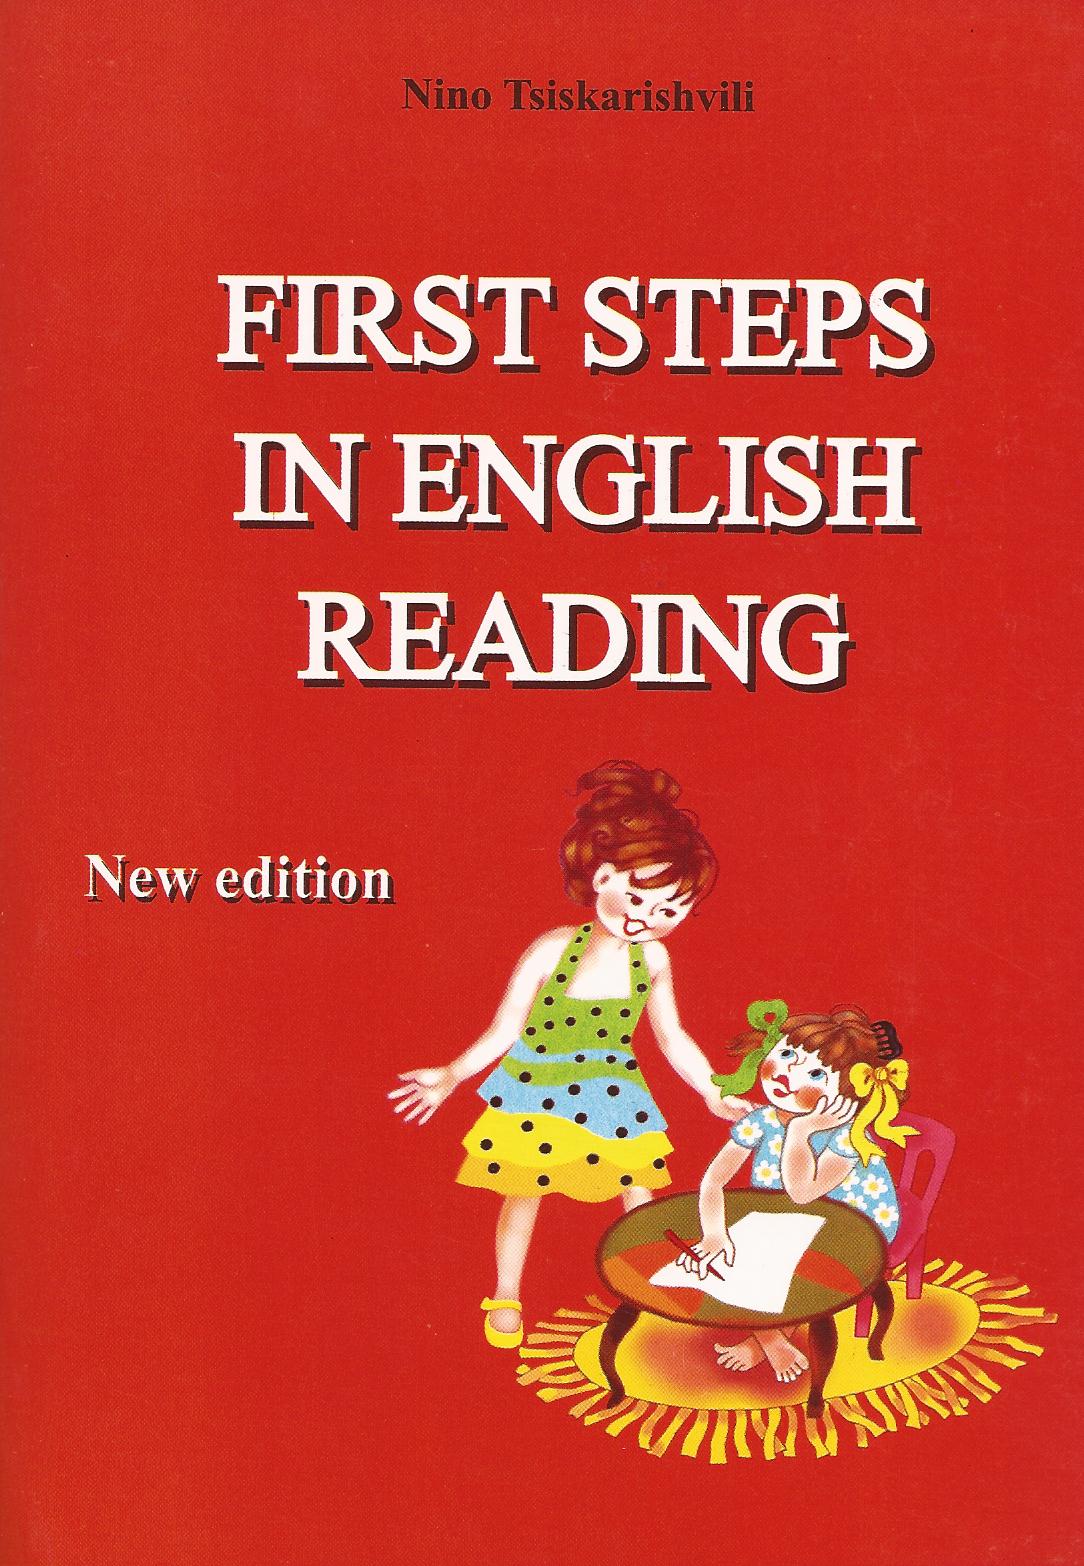 First Steps in English Reading (New Edition)